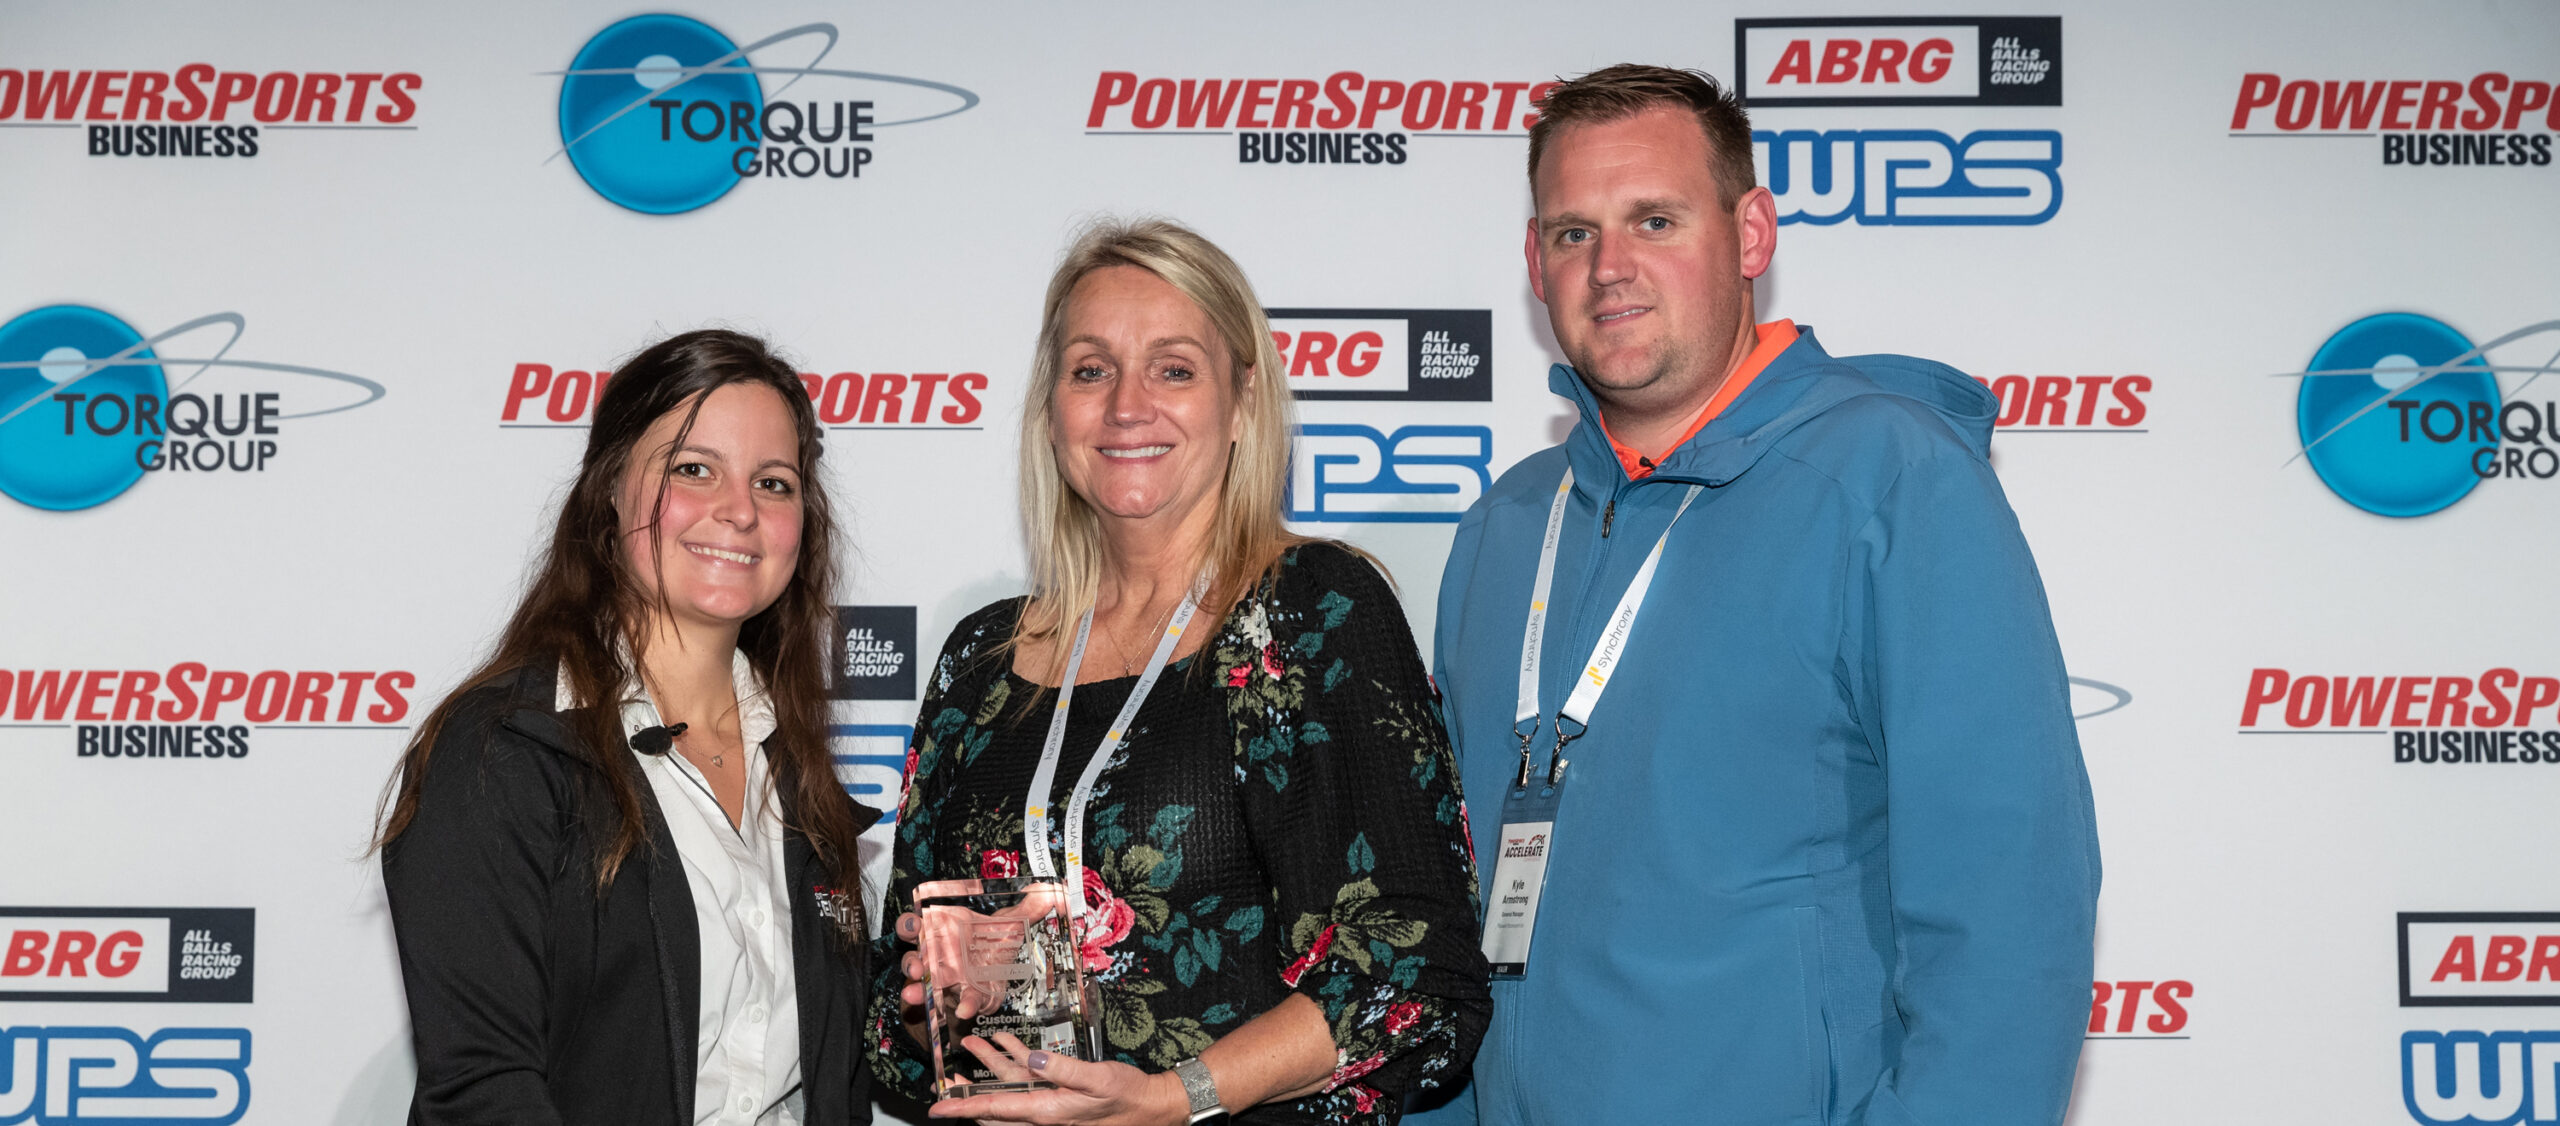 Pioneer Motorsport is awarded Best-In-Class - customer satisfaction at the 2022 Accelerate Conference